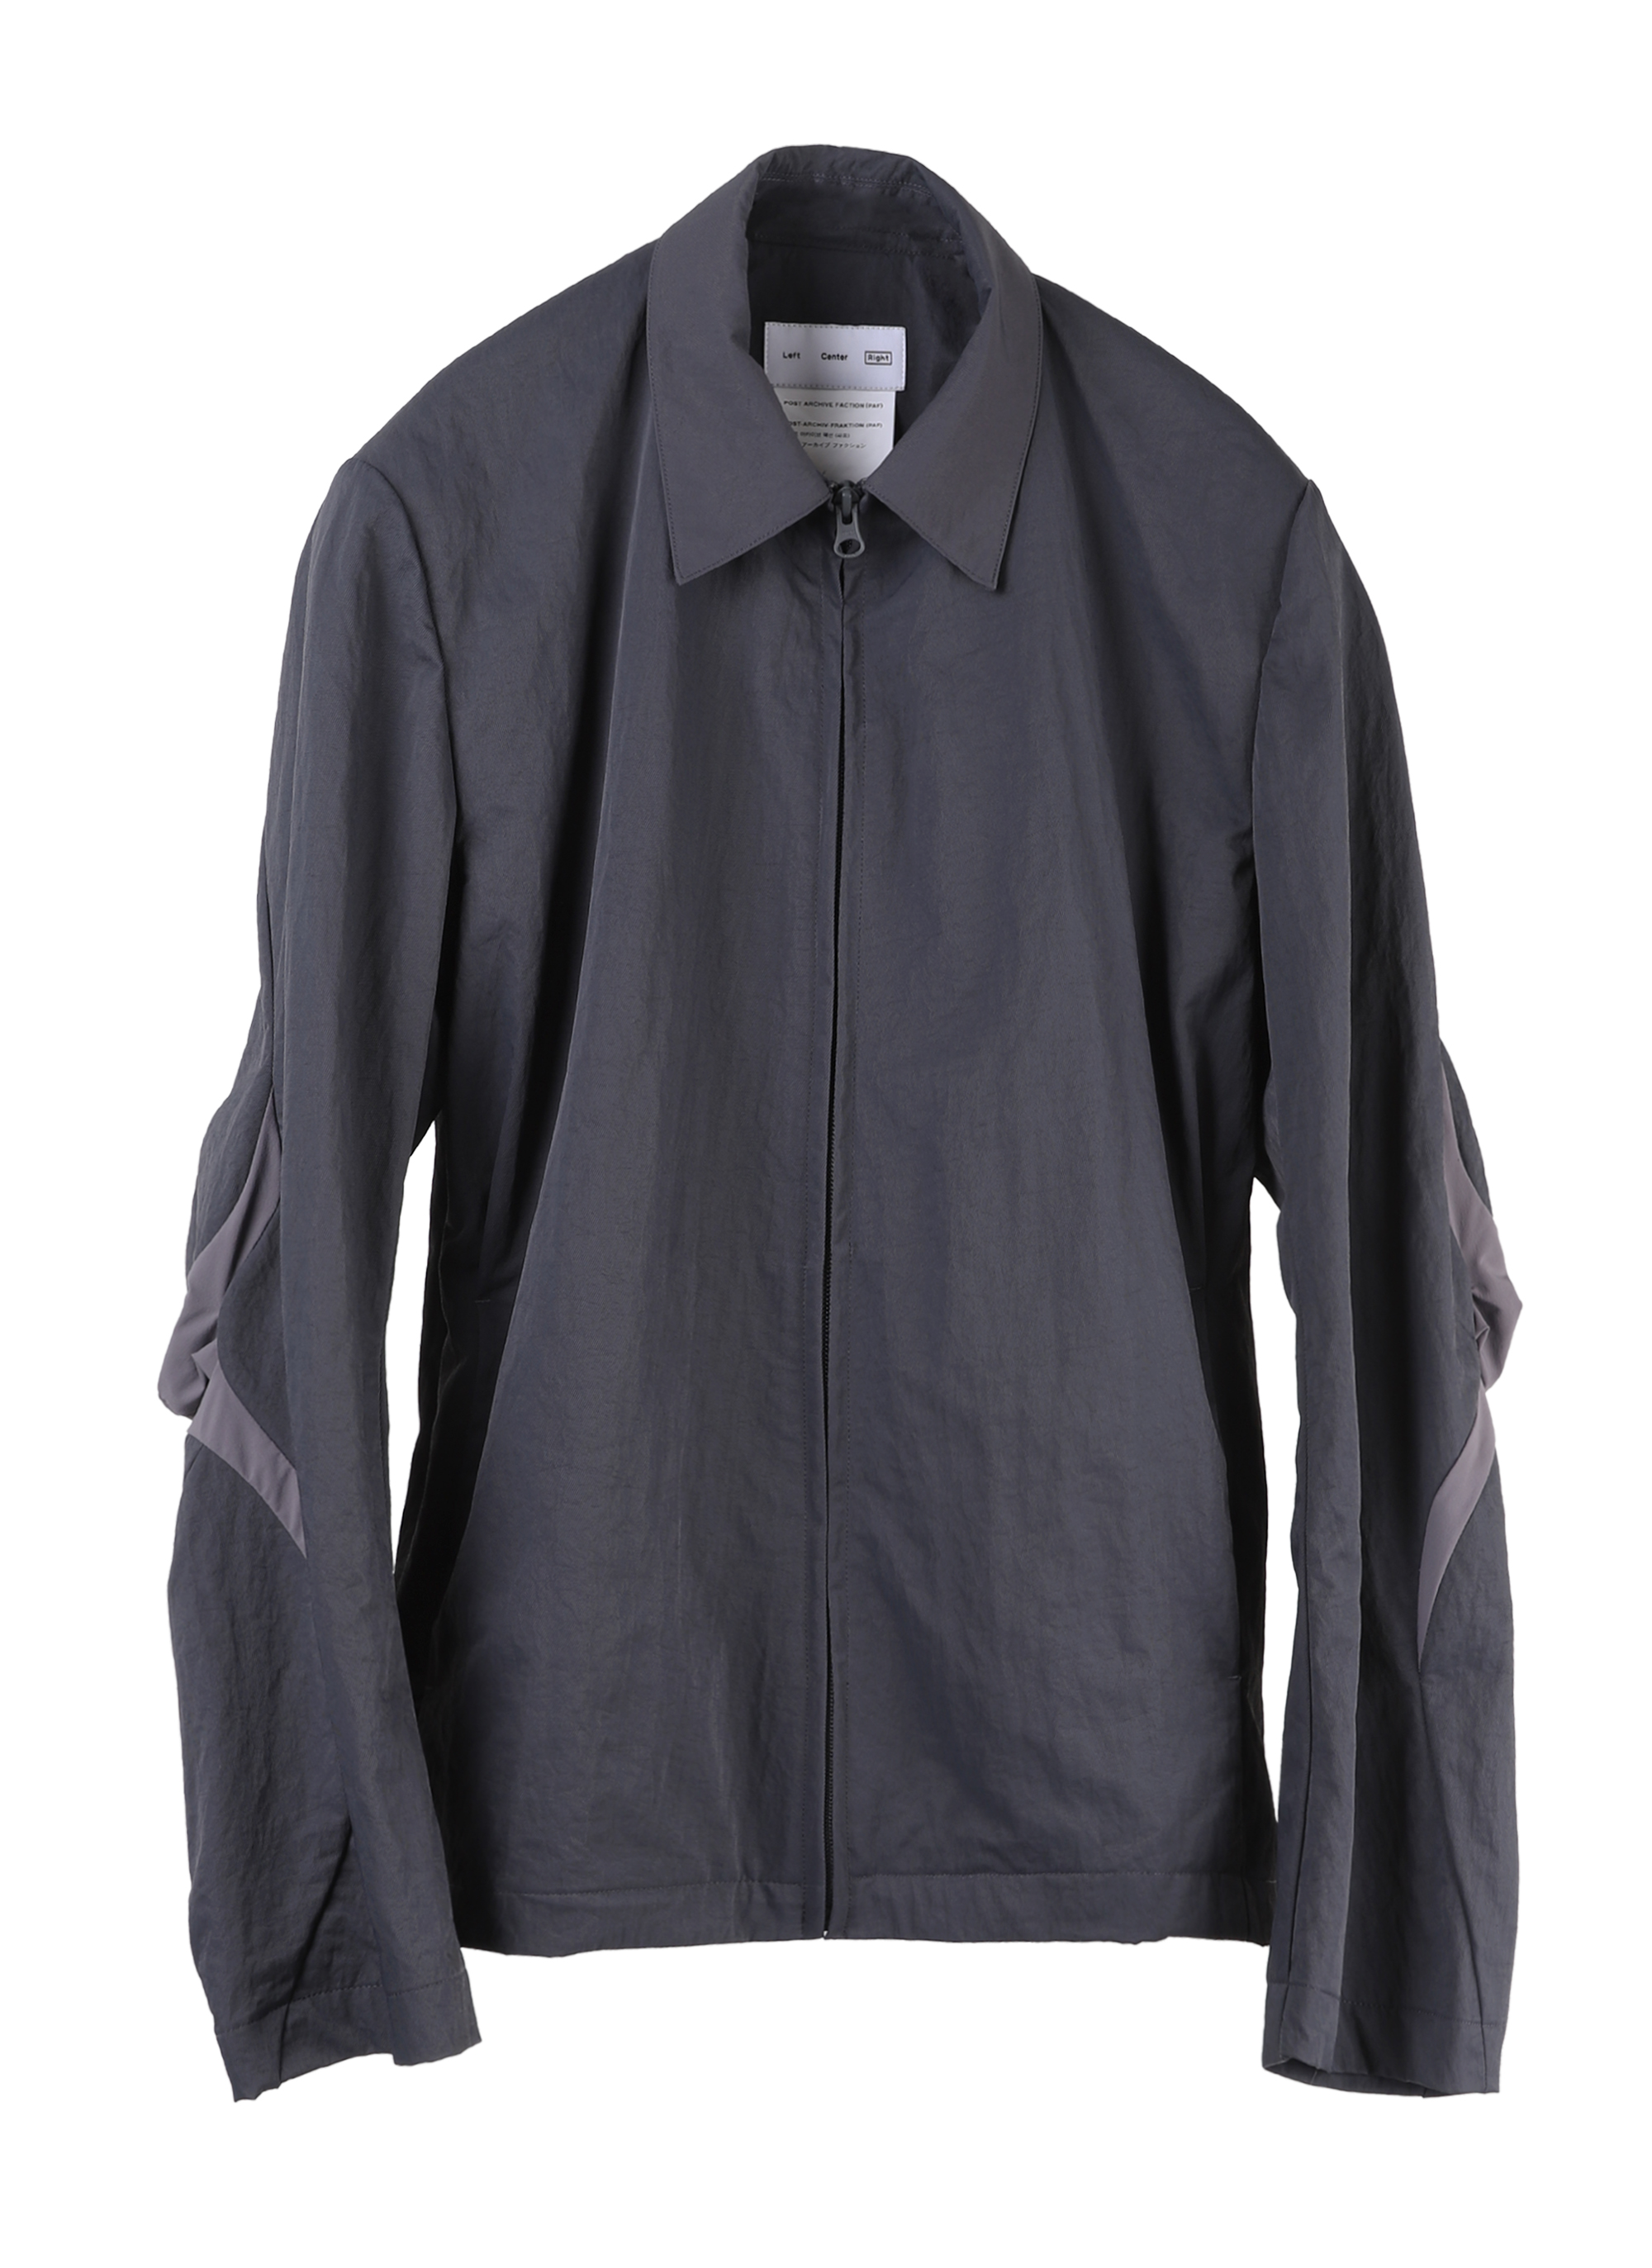 4.0 JACKET RIGHT (CHARCOAL)